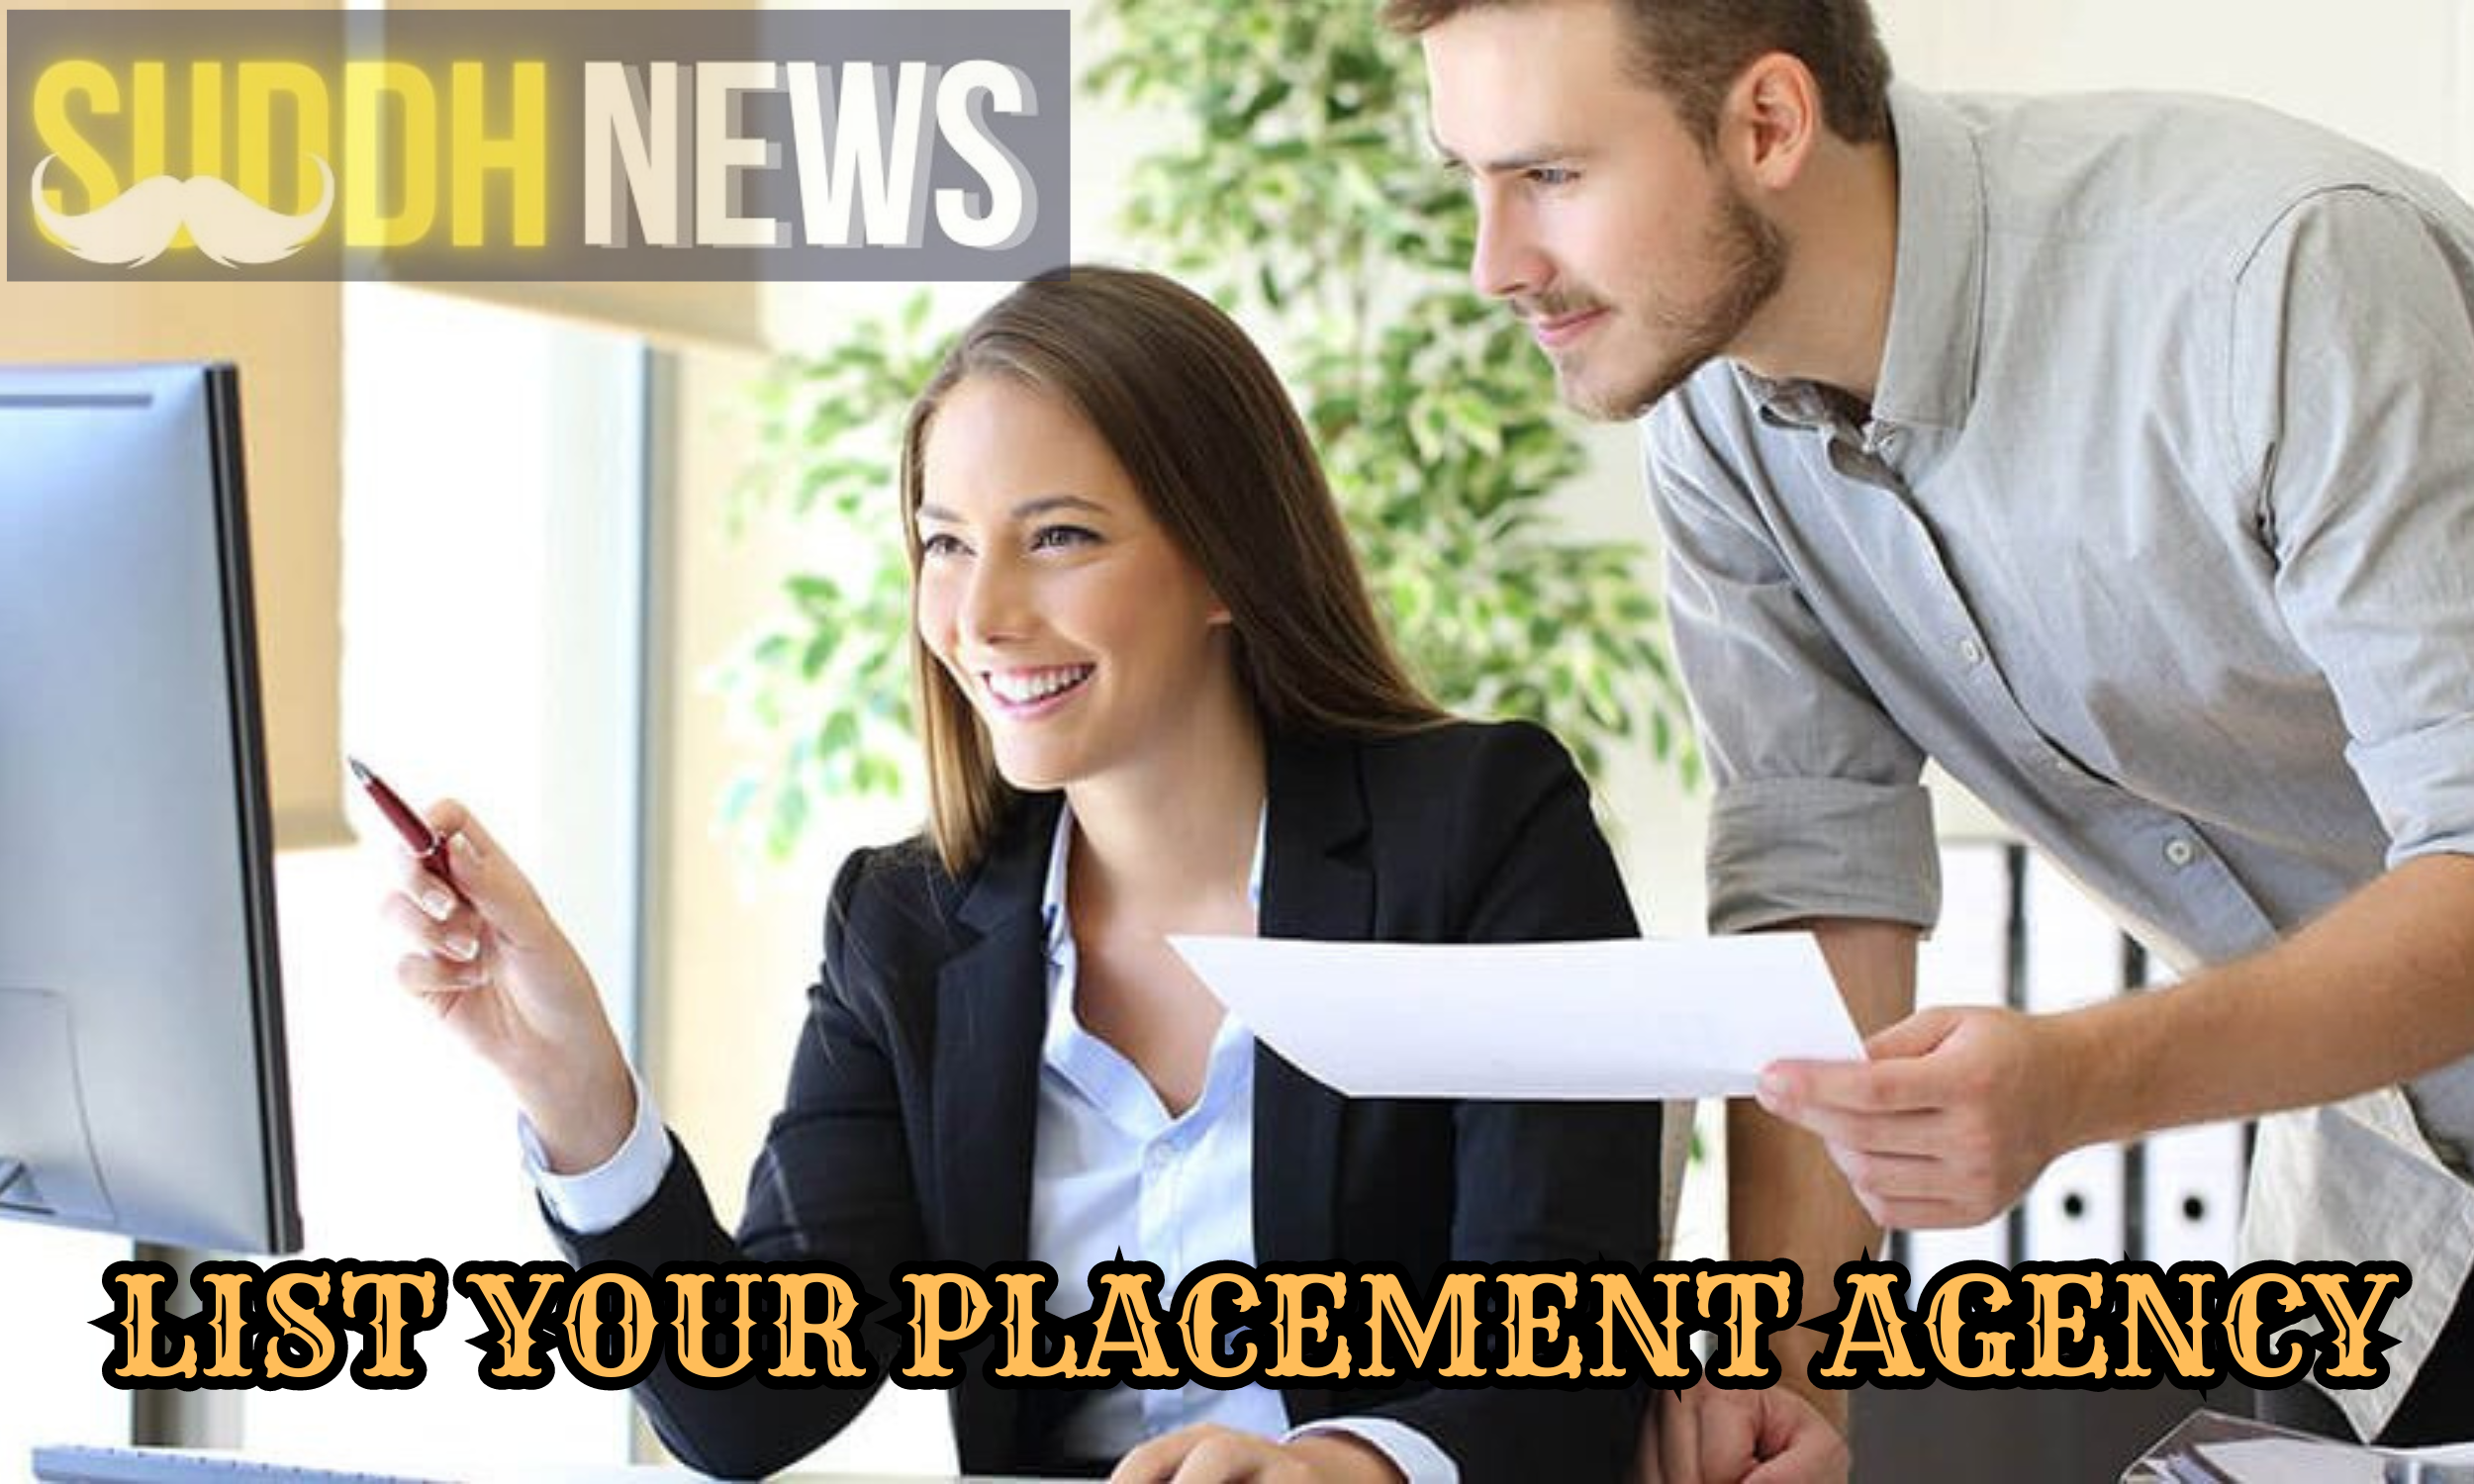 List your Placement Agency, India